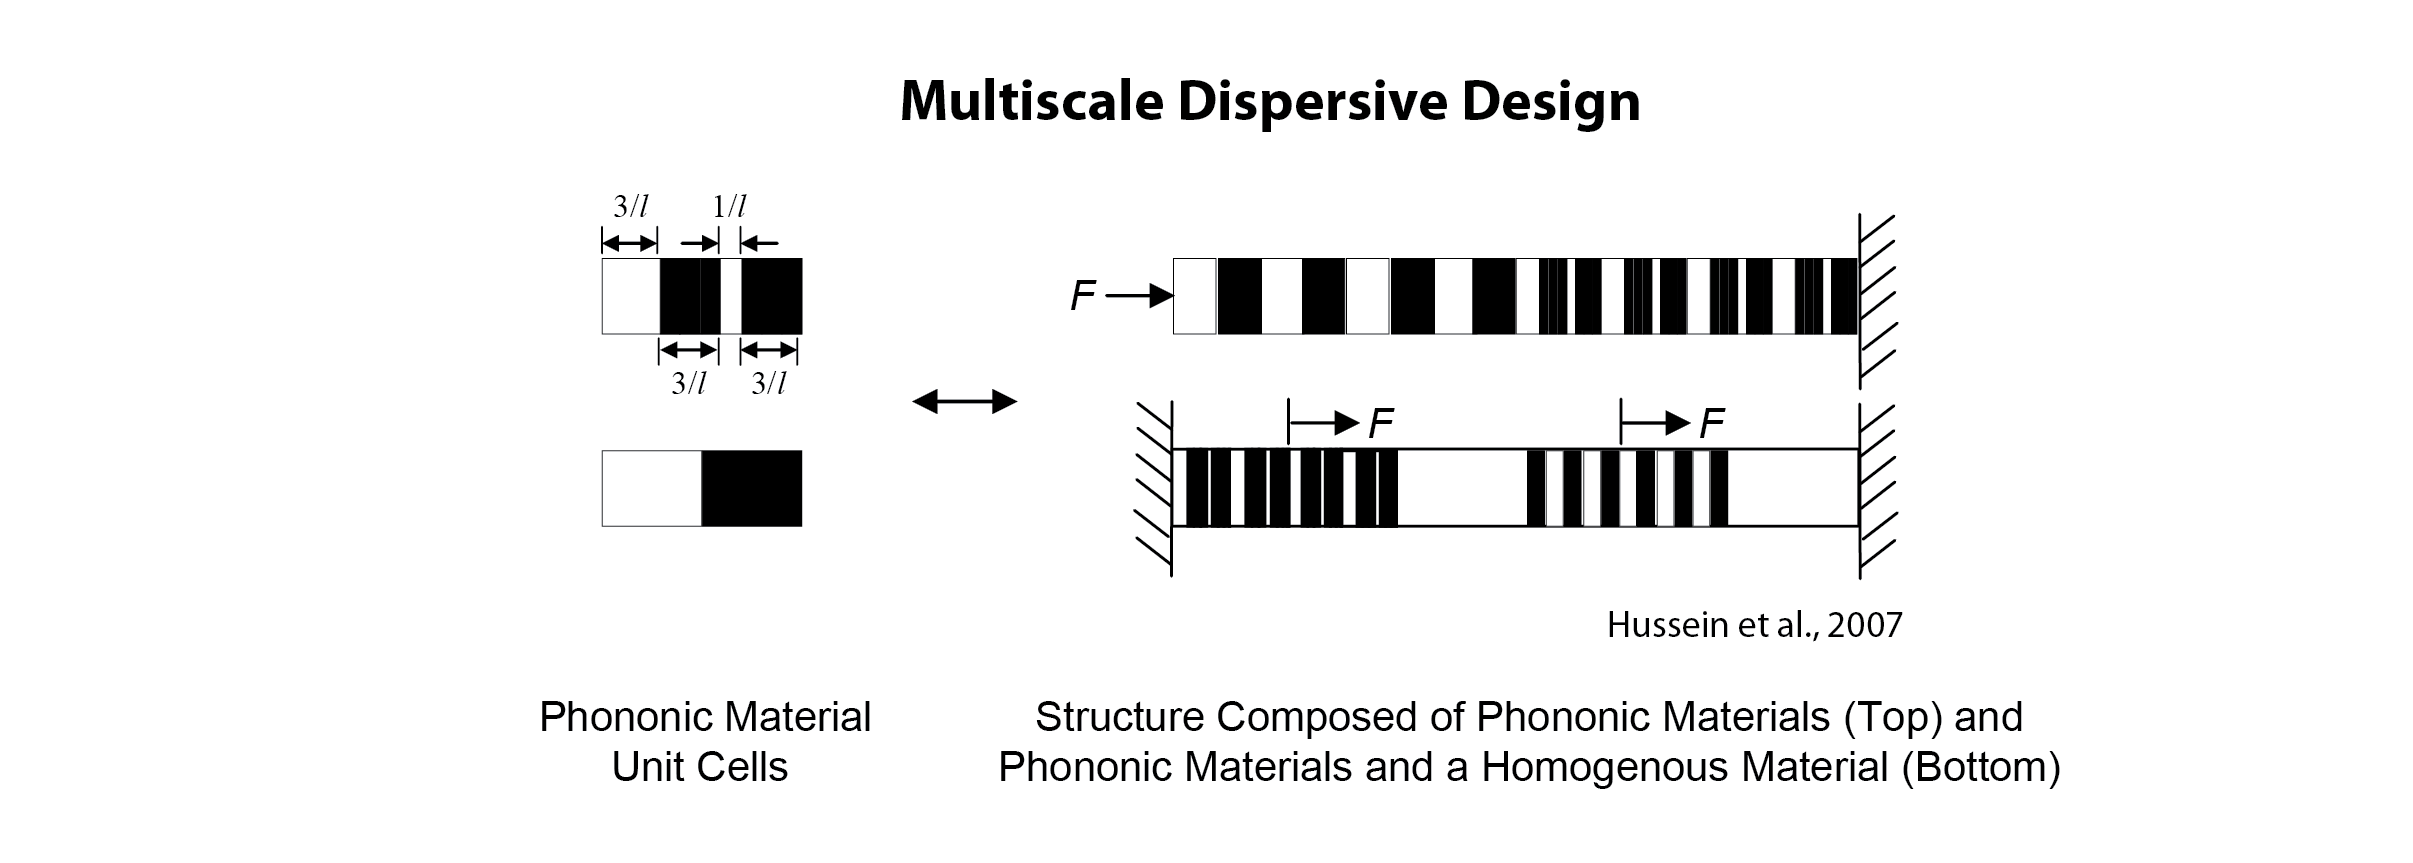  Structure Composed of Phononic Materials (Top) and Phononic Materials and a Homogenous Material (Bottom)   